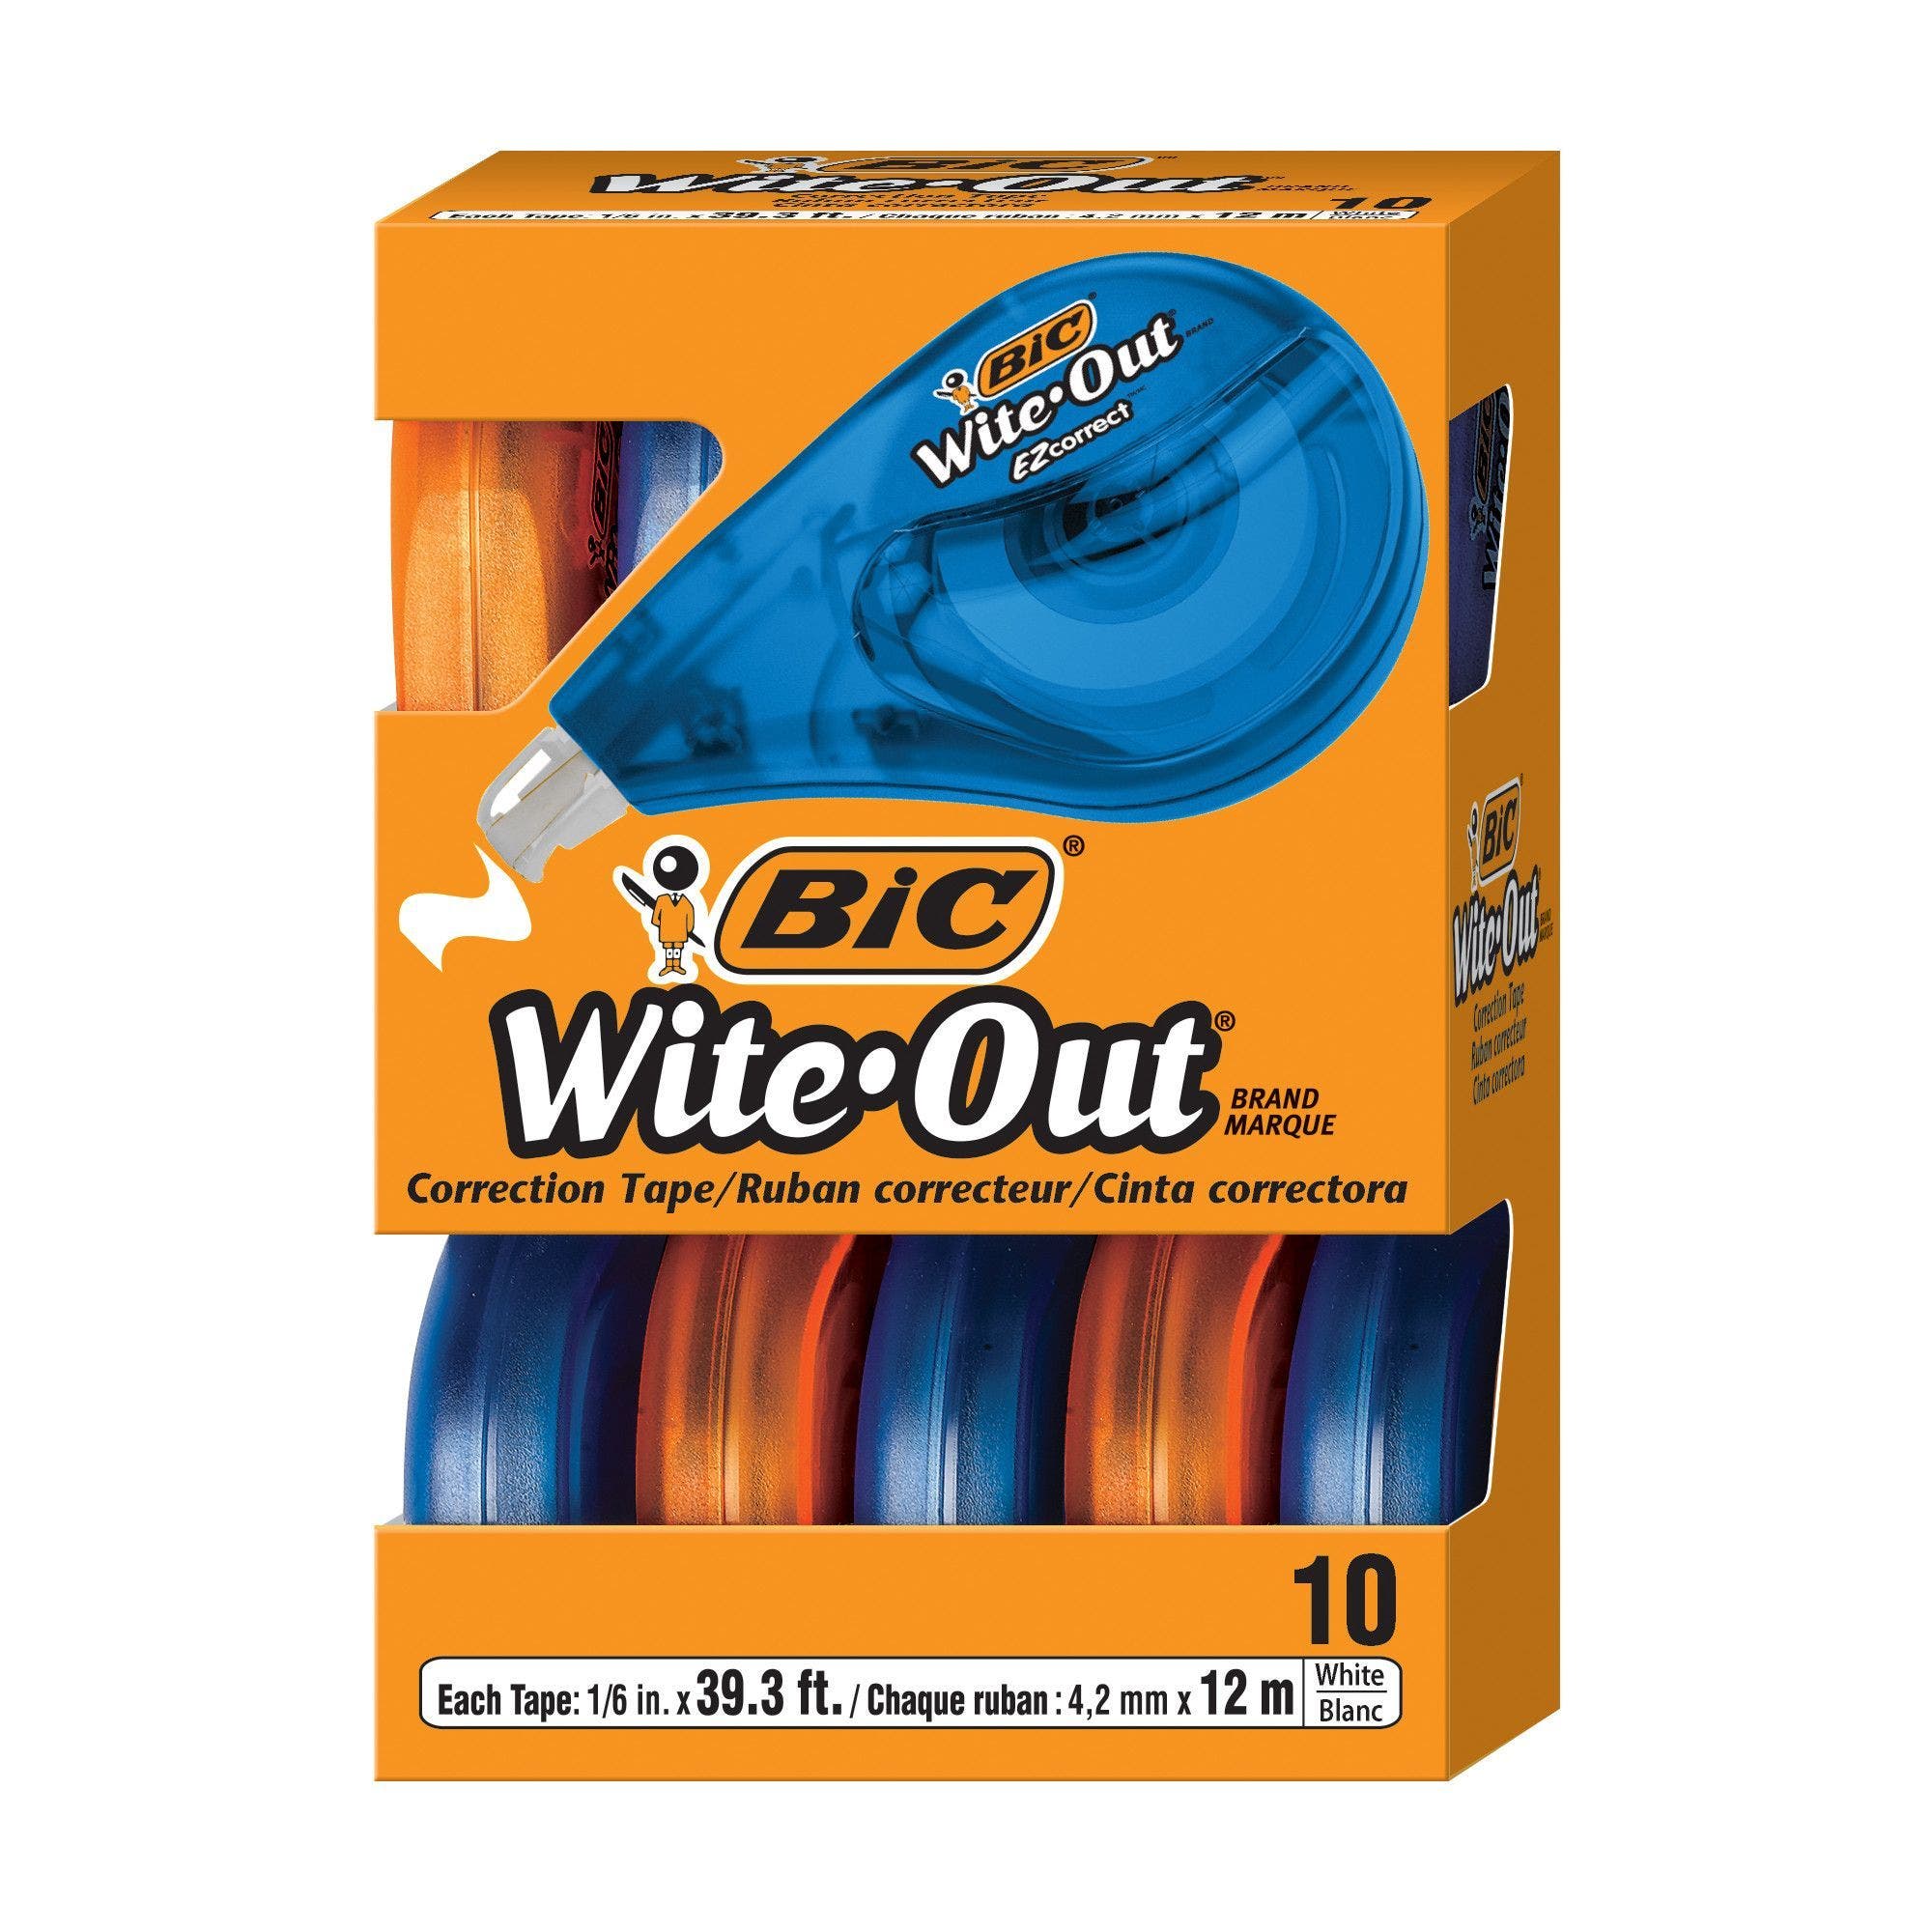 White Wite-Out Brand Mini Correction Tape New 12-Count 